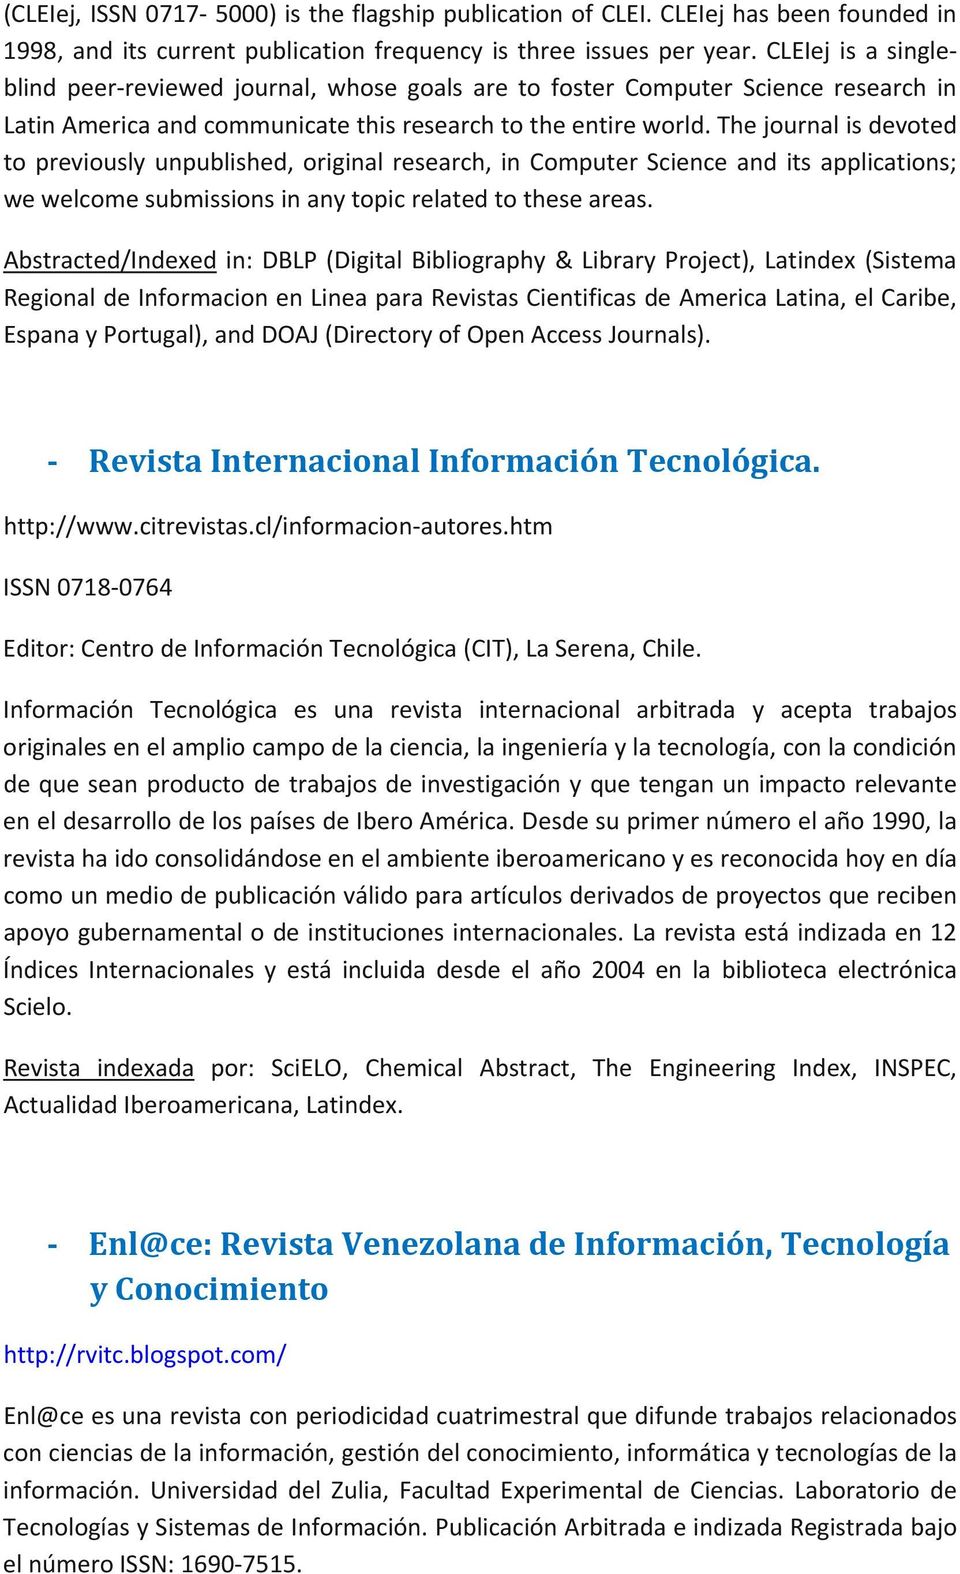 The journal is devoted to previously unpublished, original research, in Computer Science and its applications; we welcome submissions in any topic related to these areas.